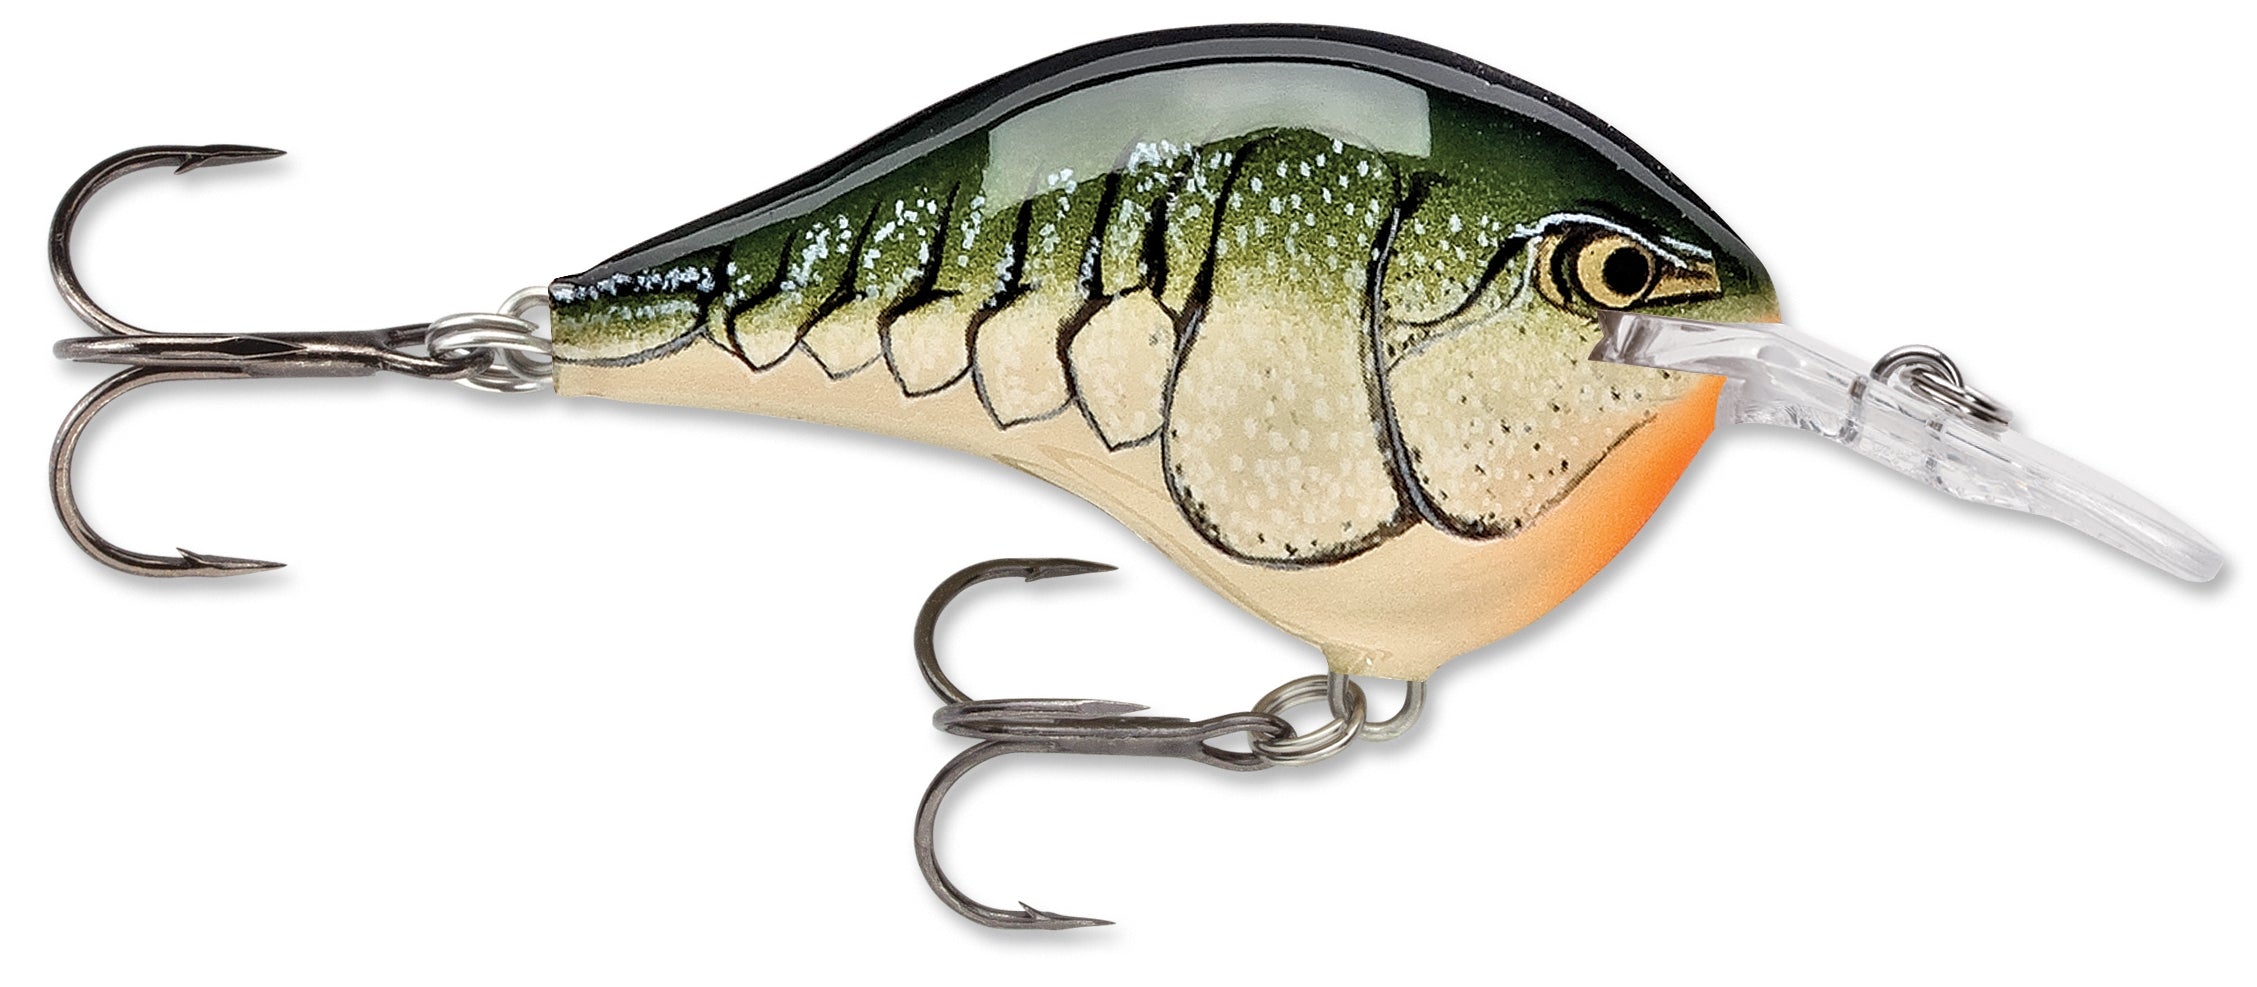 Dives-To_Olive Green Craw